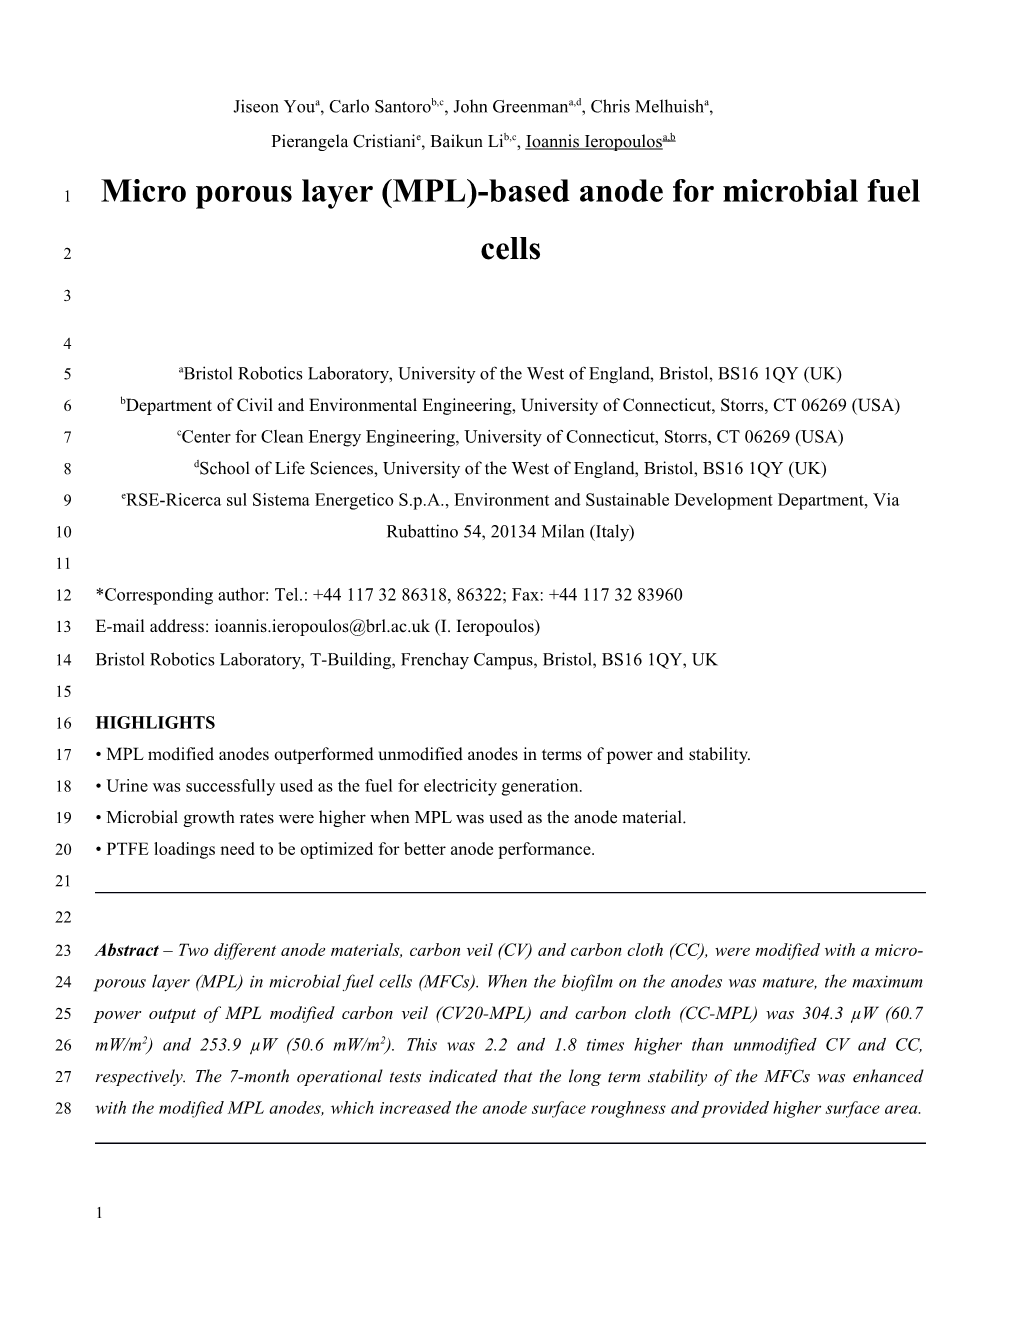 Micro Porous Layer (MPL)-Based Anode for Microbial Fuel Cells